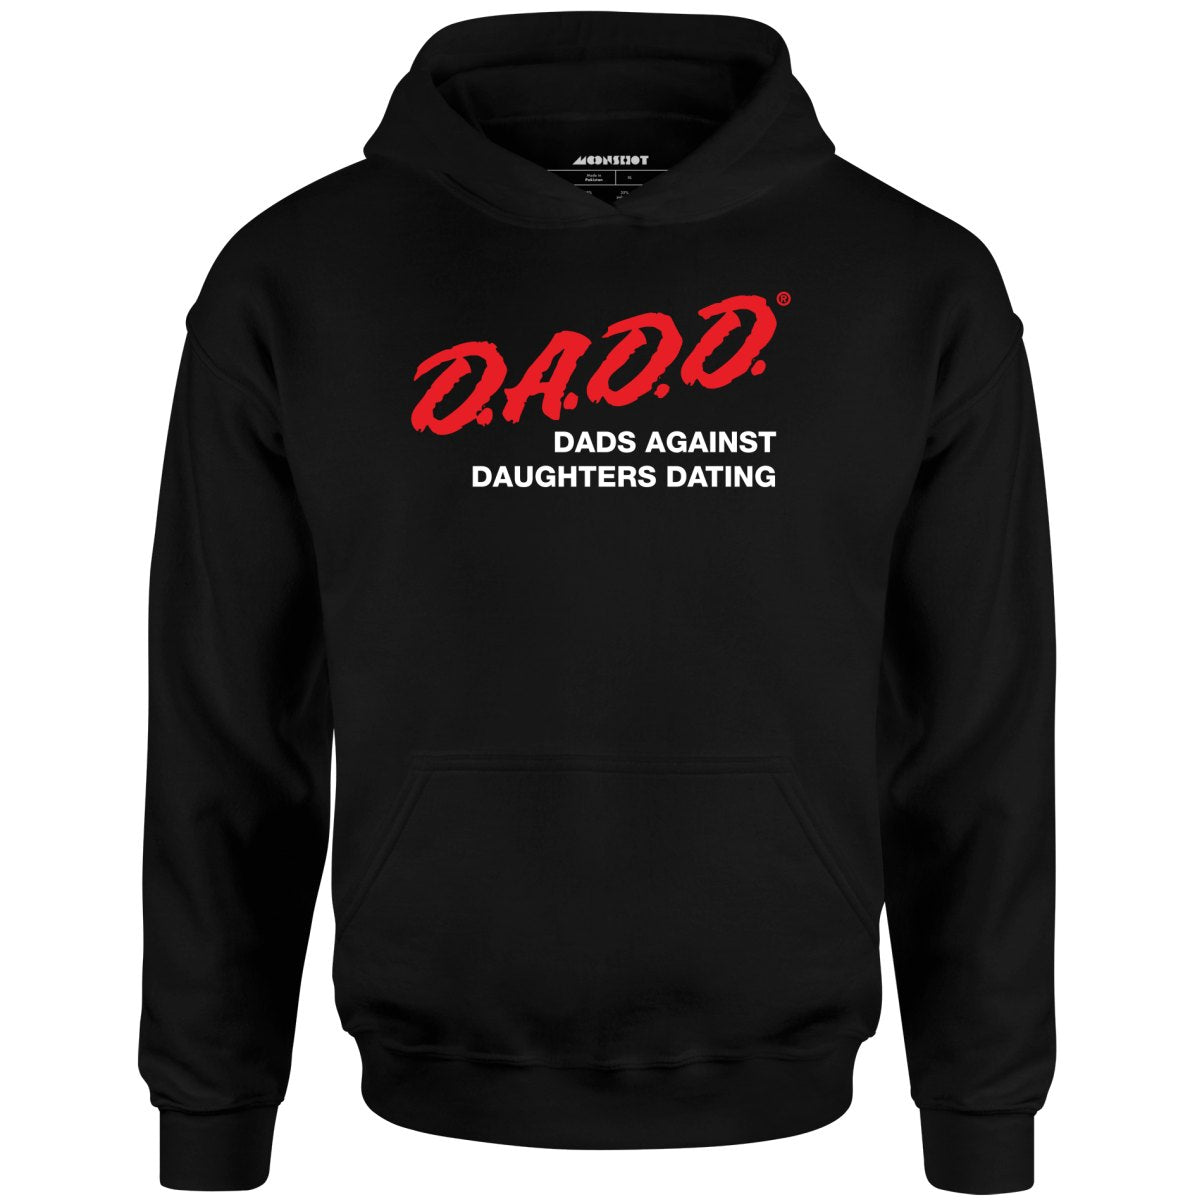 Dads Against Daughters Dating - Unisex Hoodie